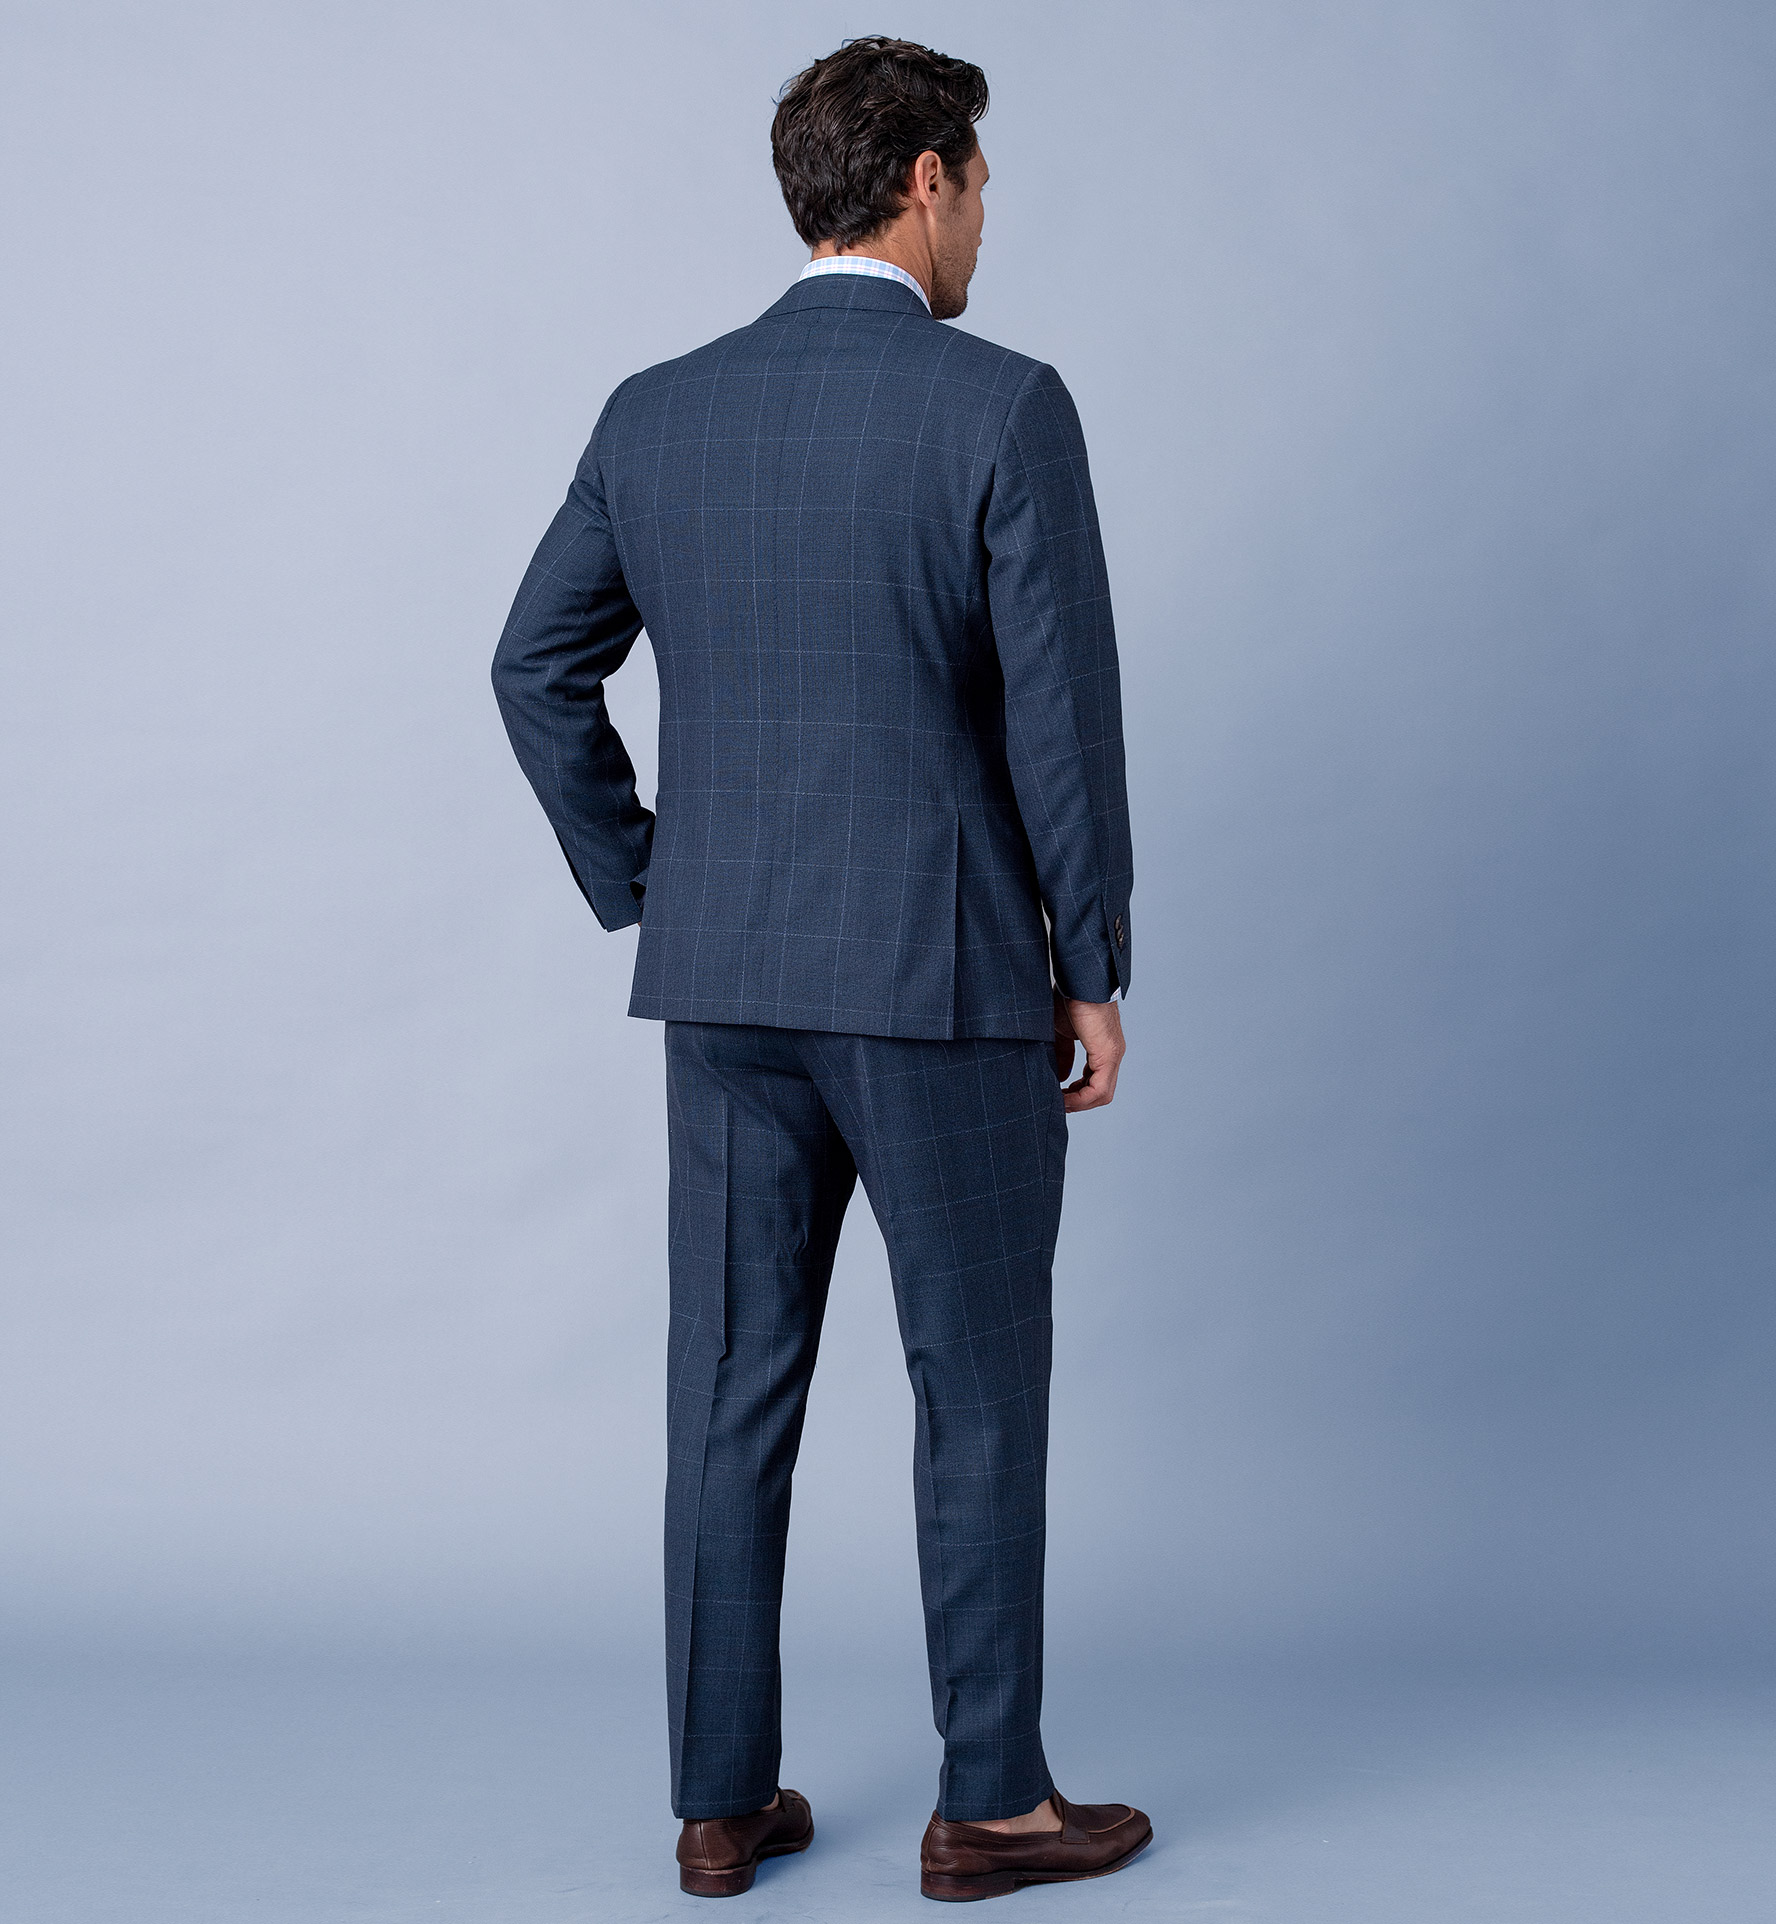 Allen Blue S130s Windowpane Suit - Custom Fit Tailored Clothing